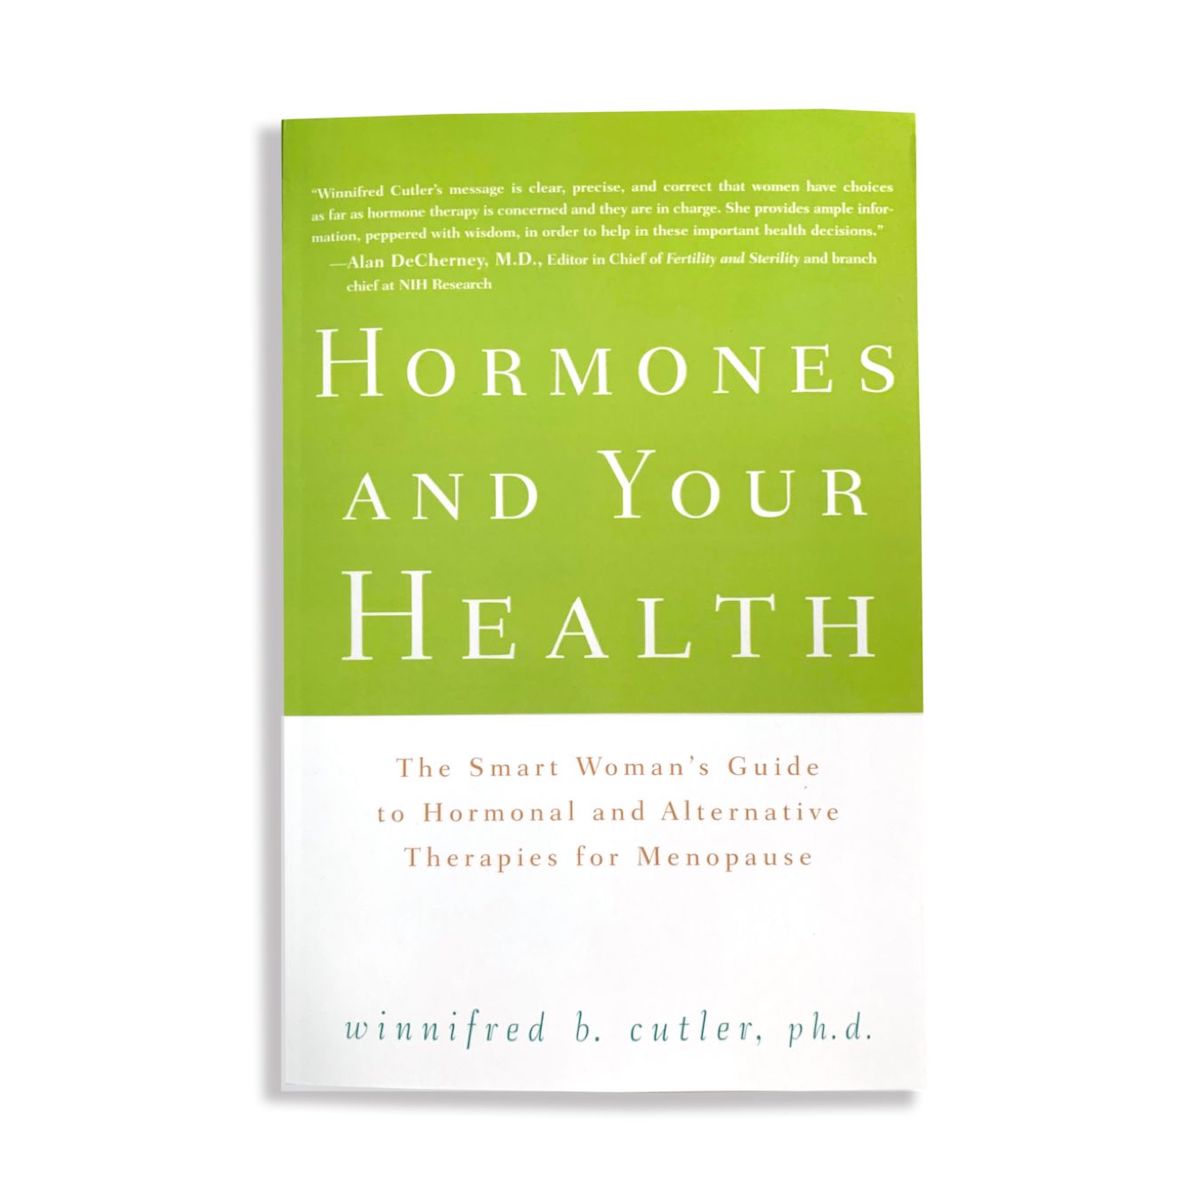 Hormones and Your Health